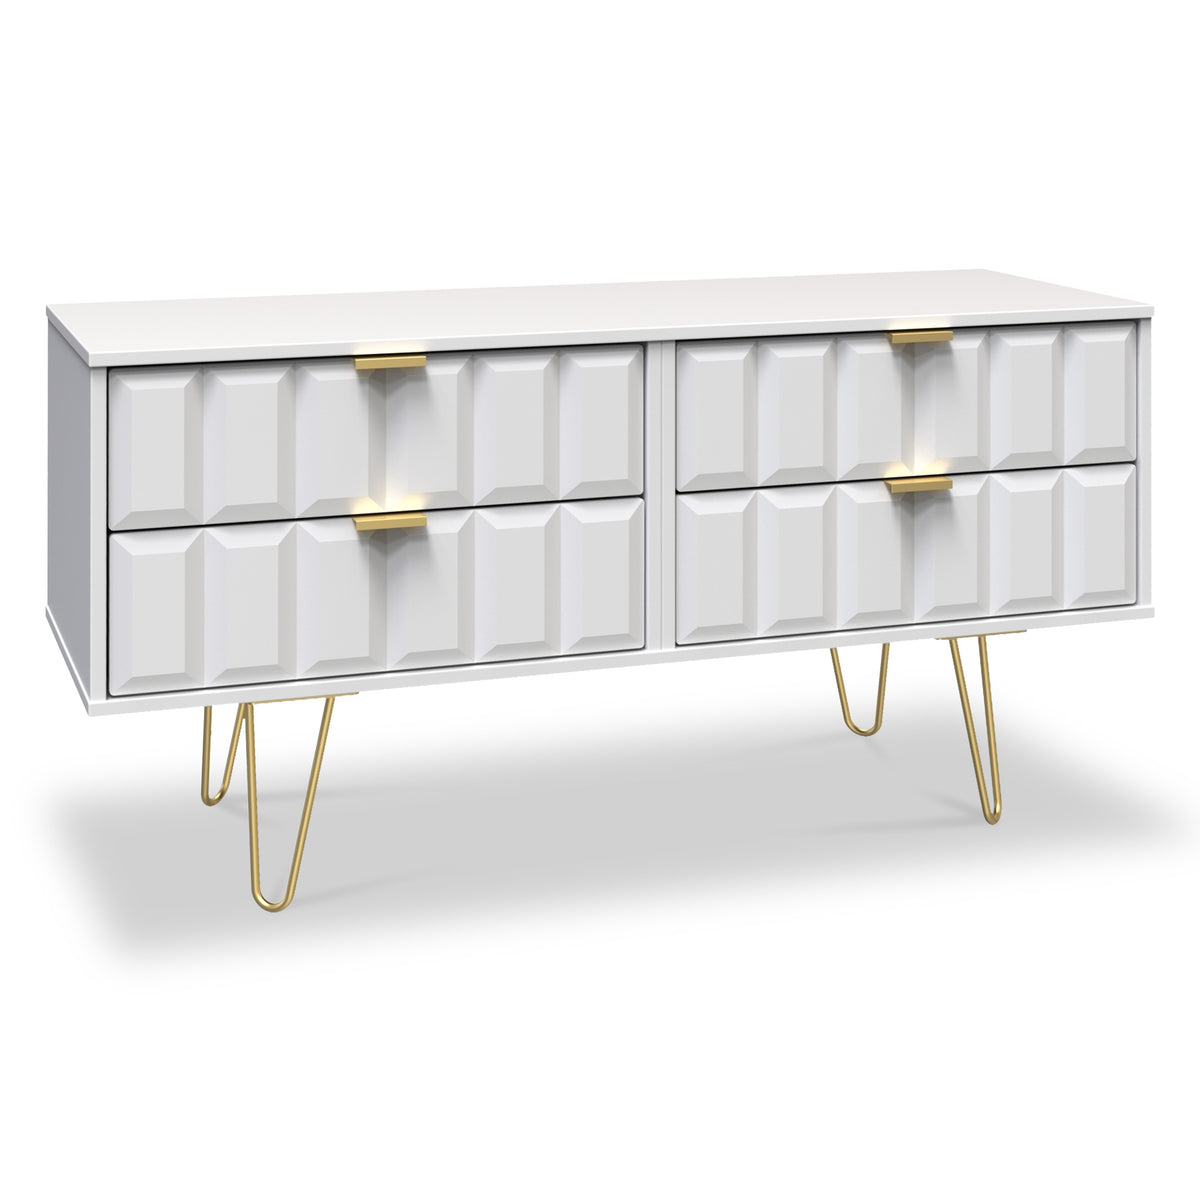 Harlow White 4 Drawer Low TV Unit with Gold Hairpin Legs from Roseland